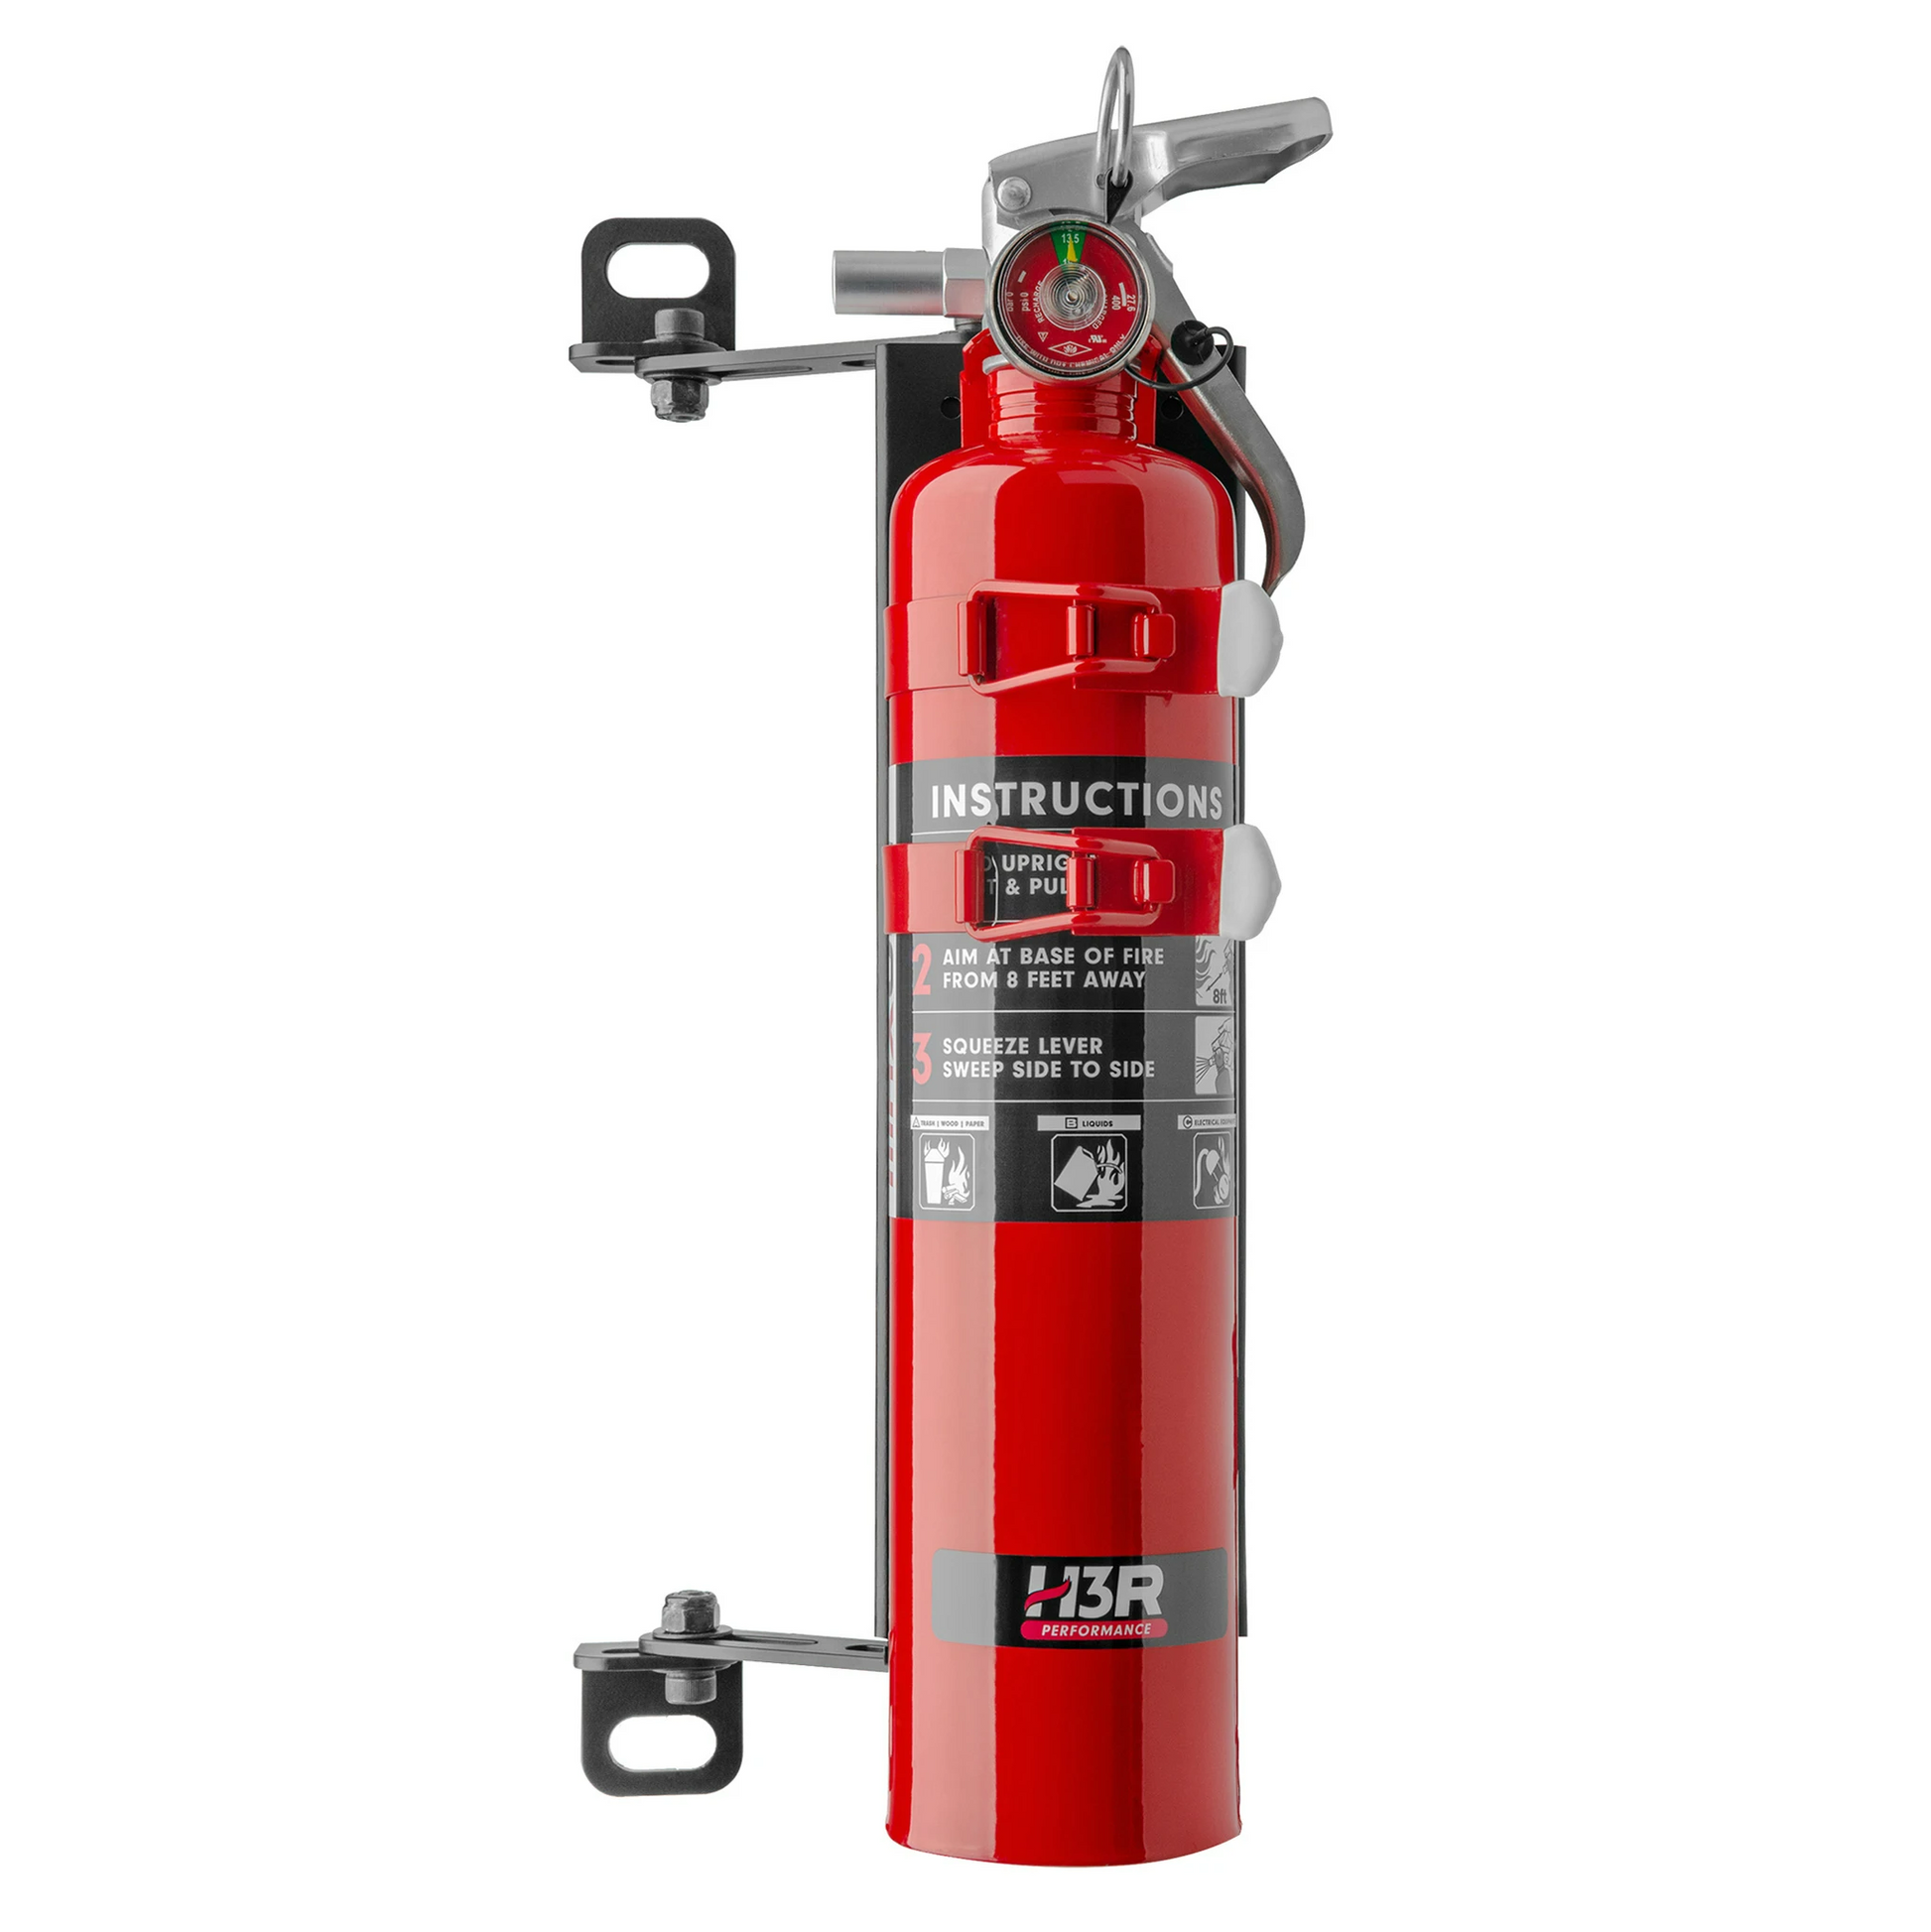 UTV Fire Extinguisher 2.5 Pound Red Maxout Dry Chemical